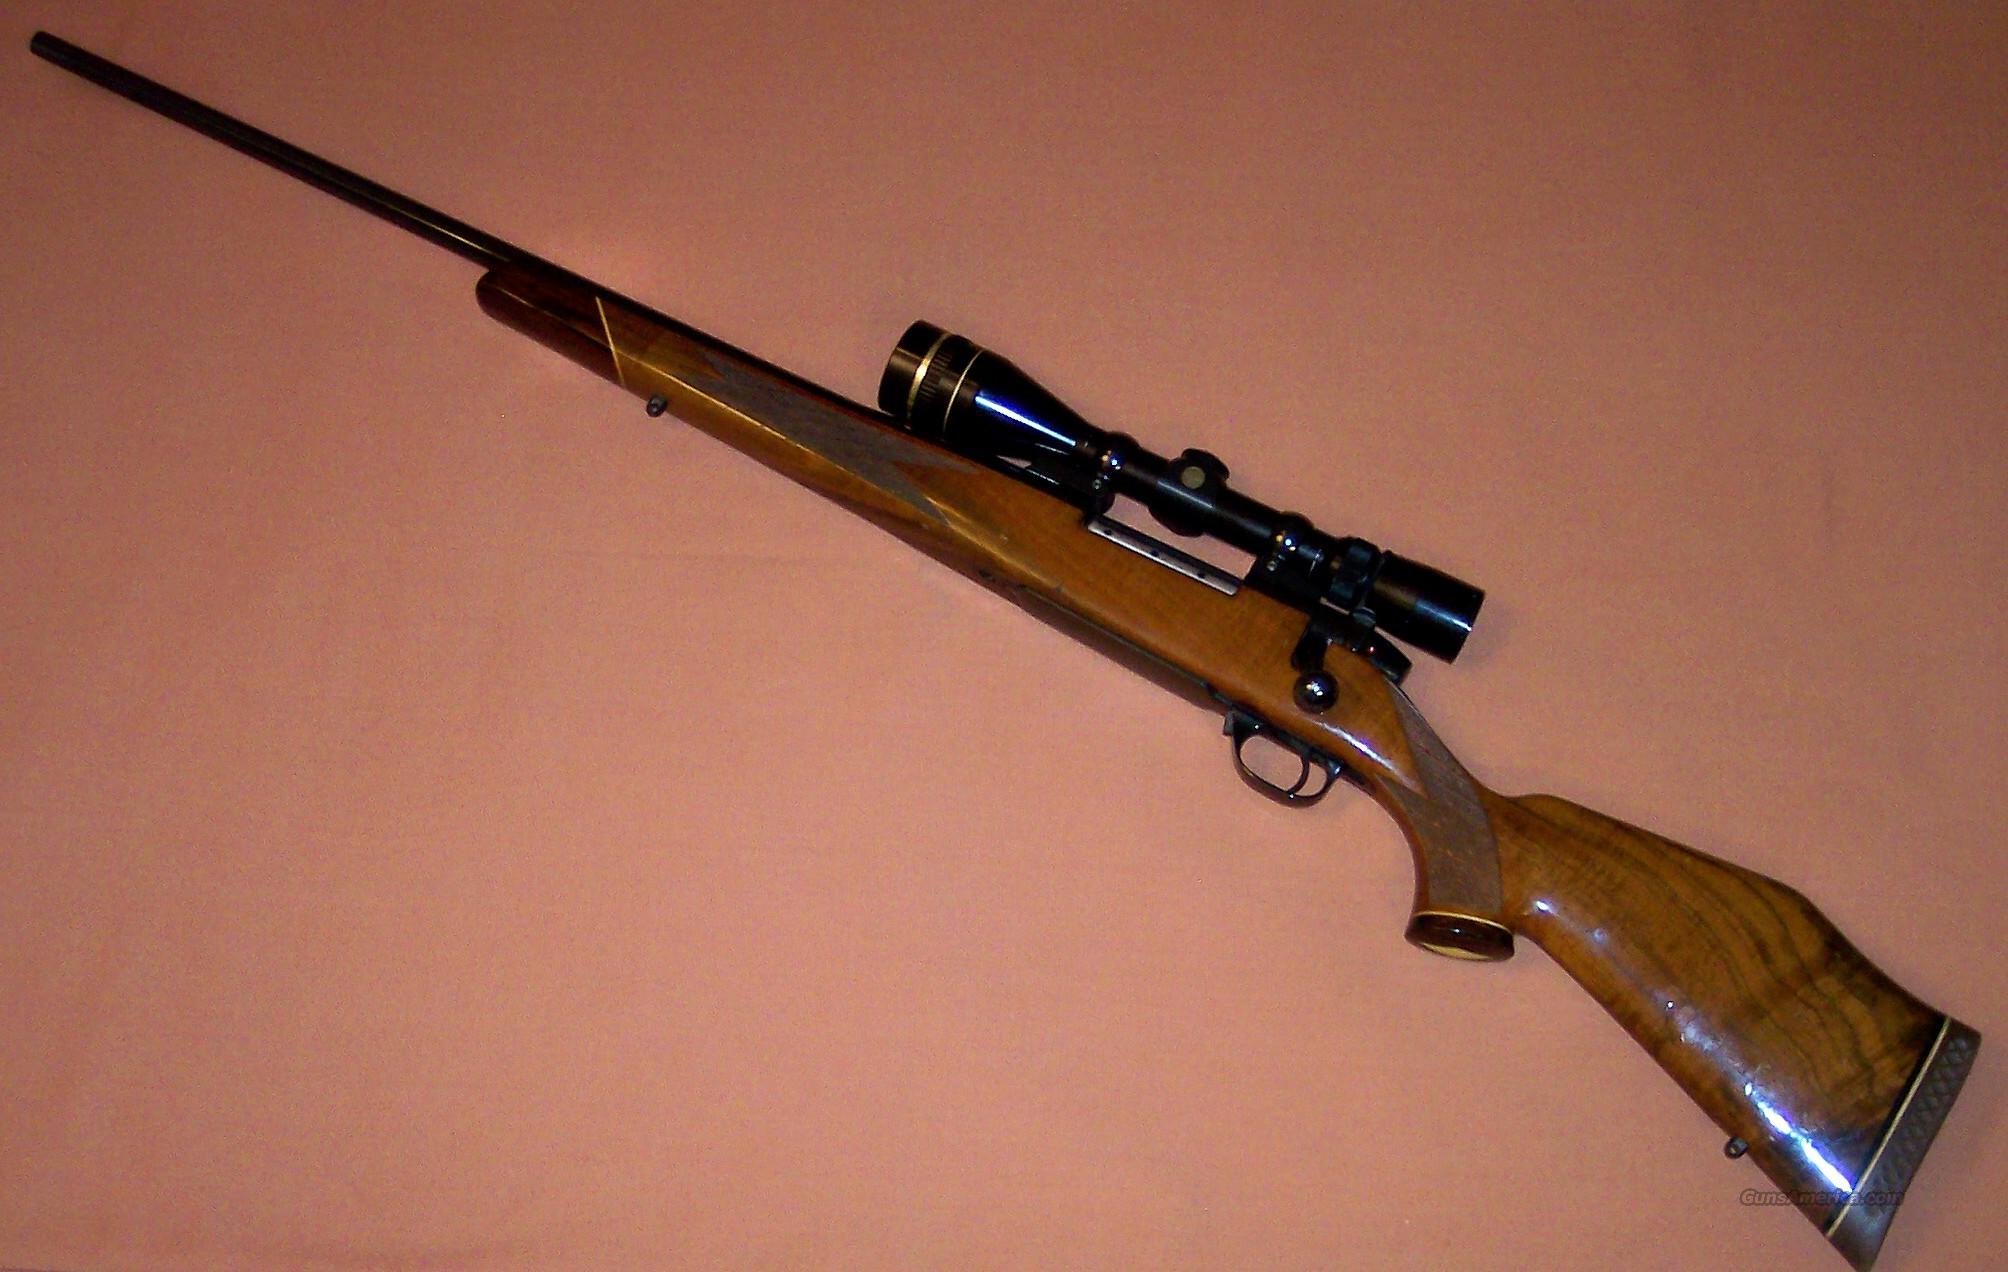 weatherby rifle serial number search